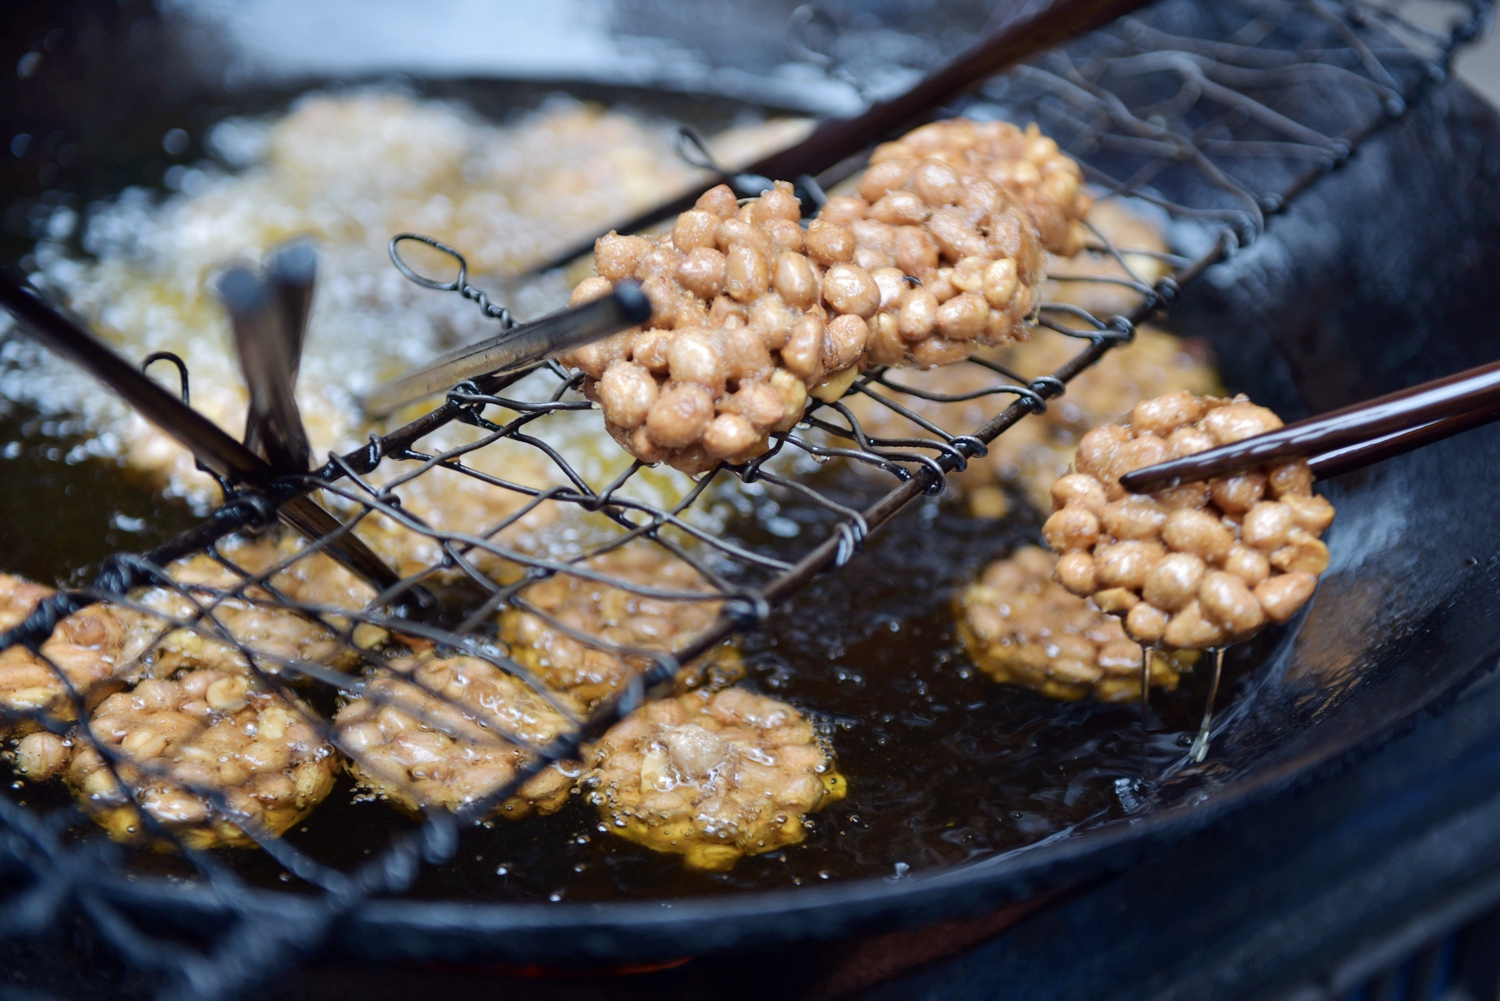 Wupo peanut cakes are fried in oil. /Photo provided to CGTN